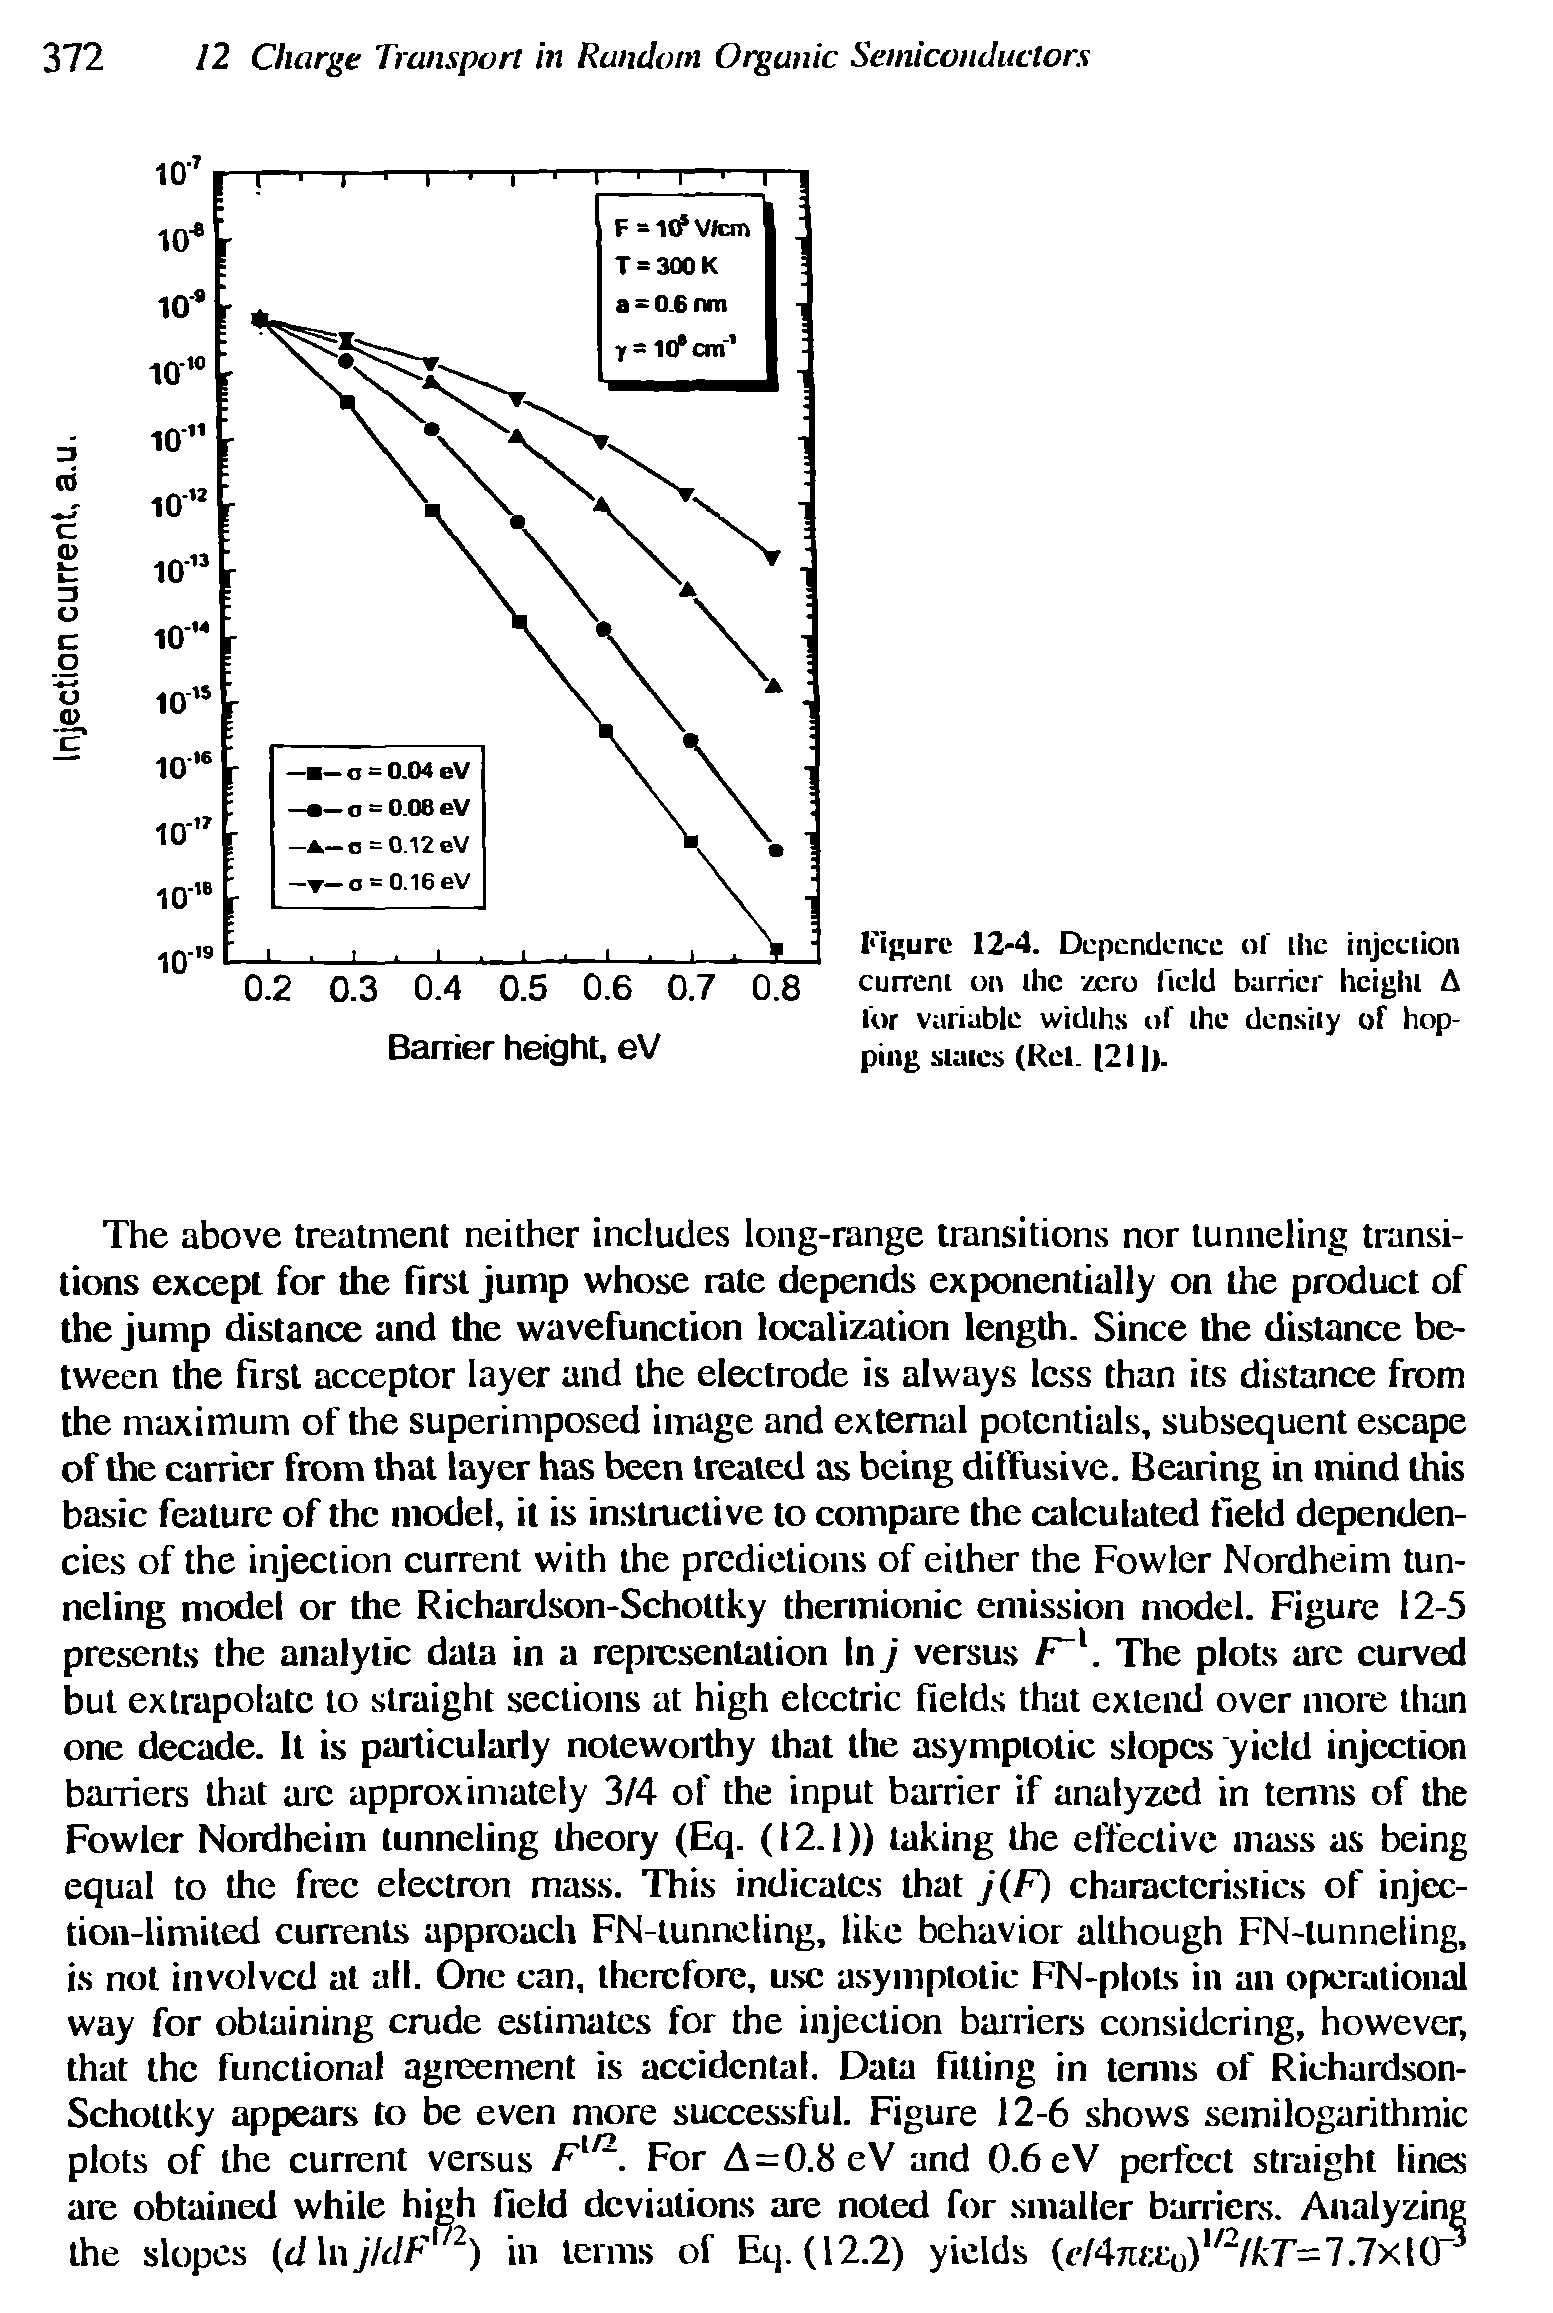 Figure 12-4. Dependence of die injection current on the zero Held barrier height A lor variable widths of the density of hopping states (Rel. 2I ).